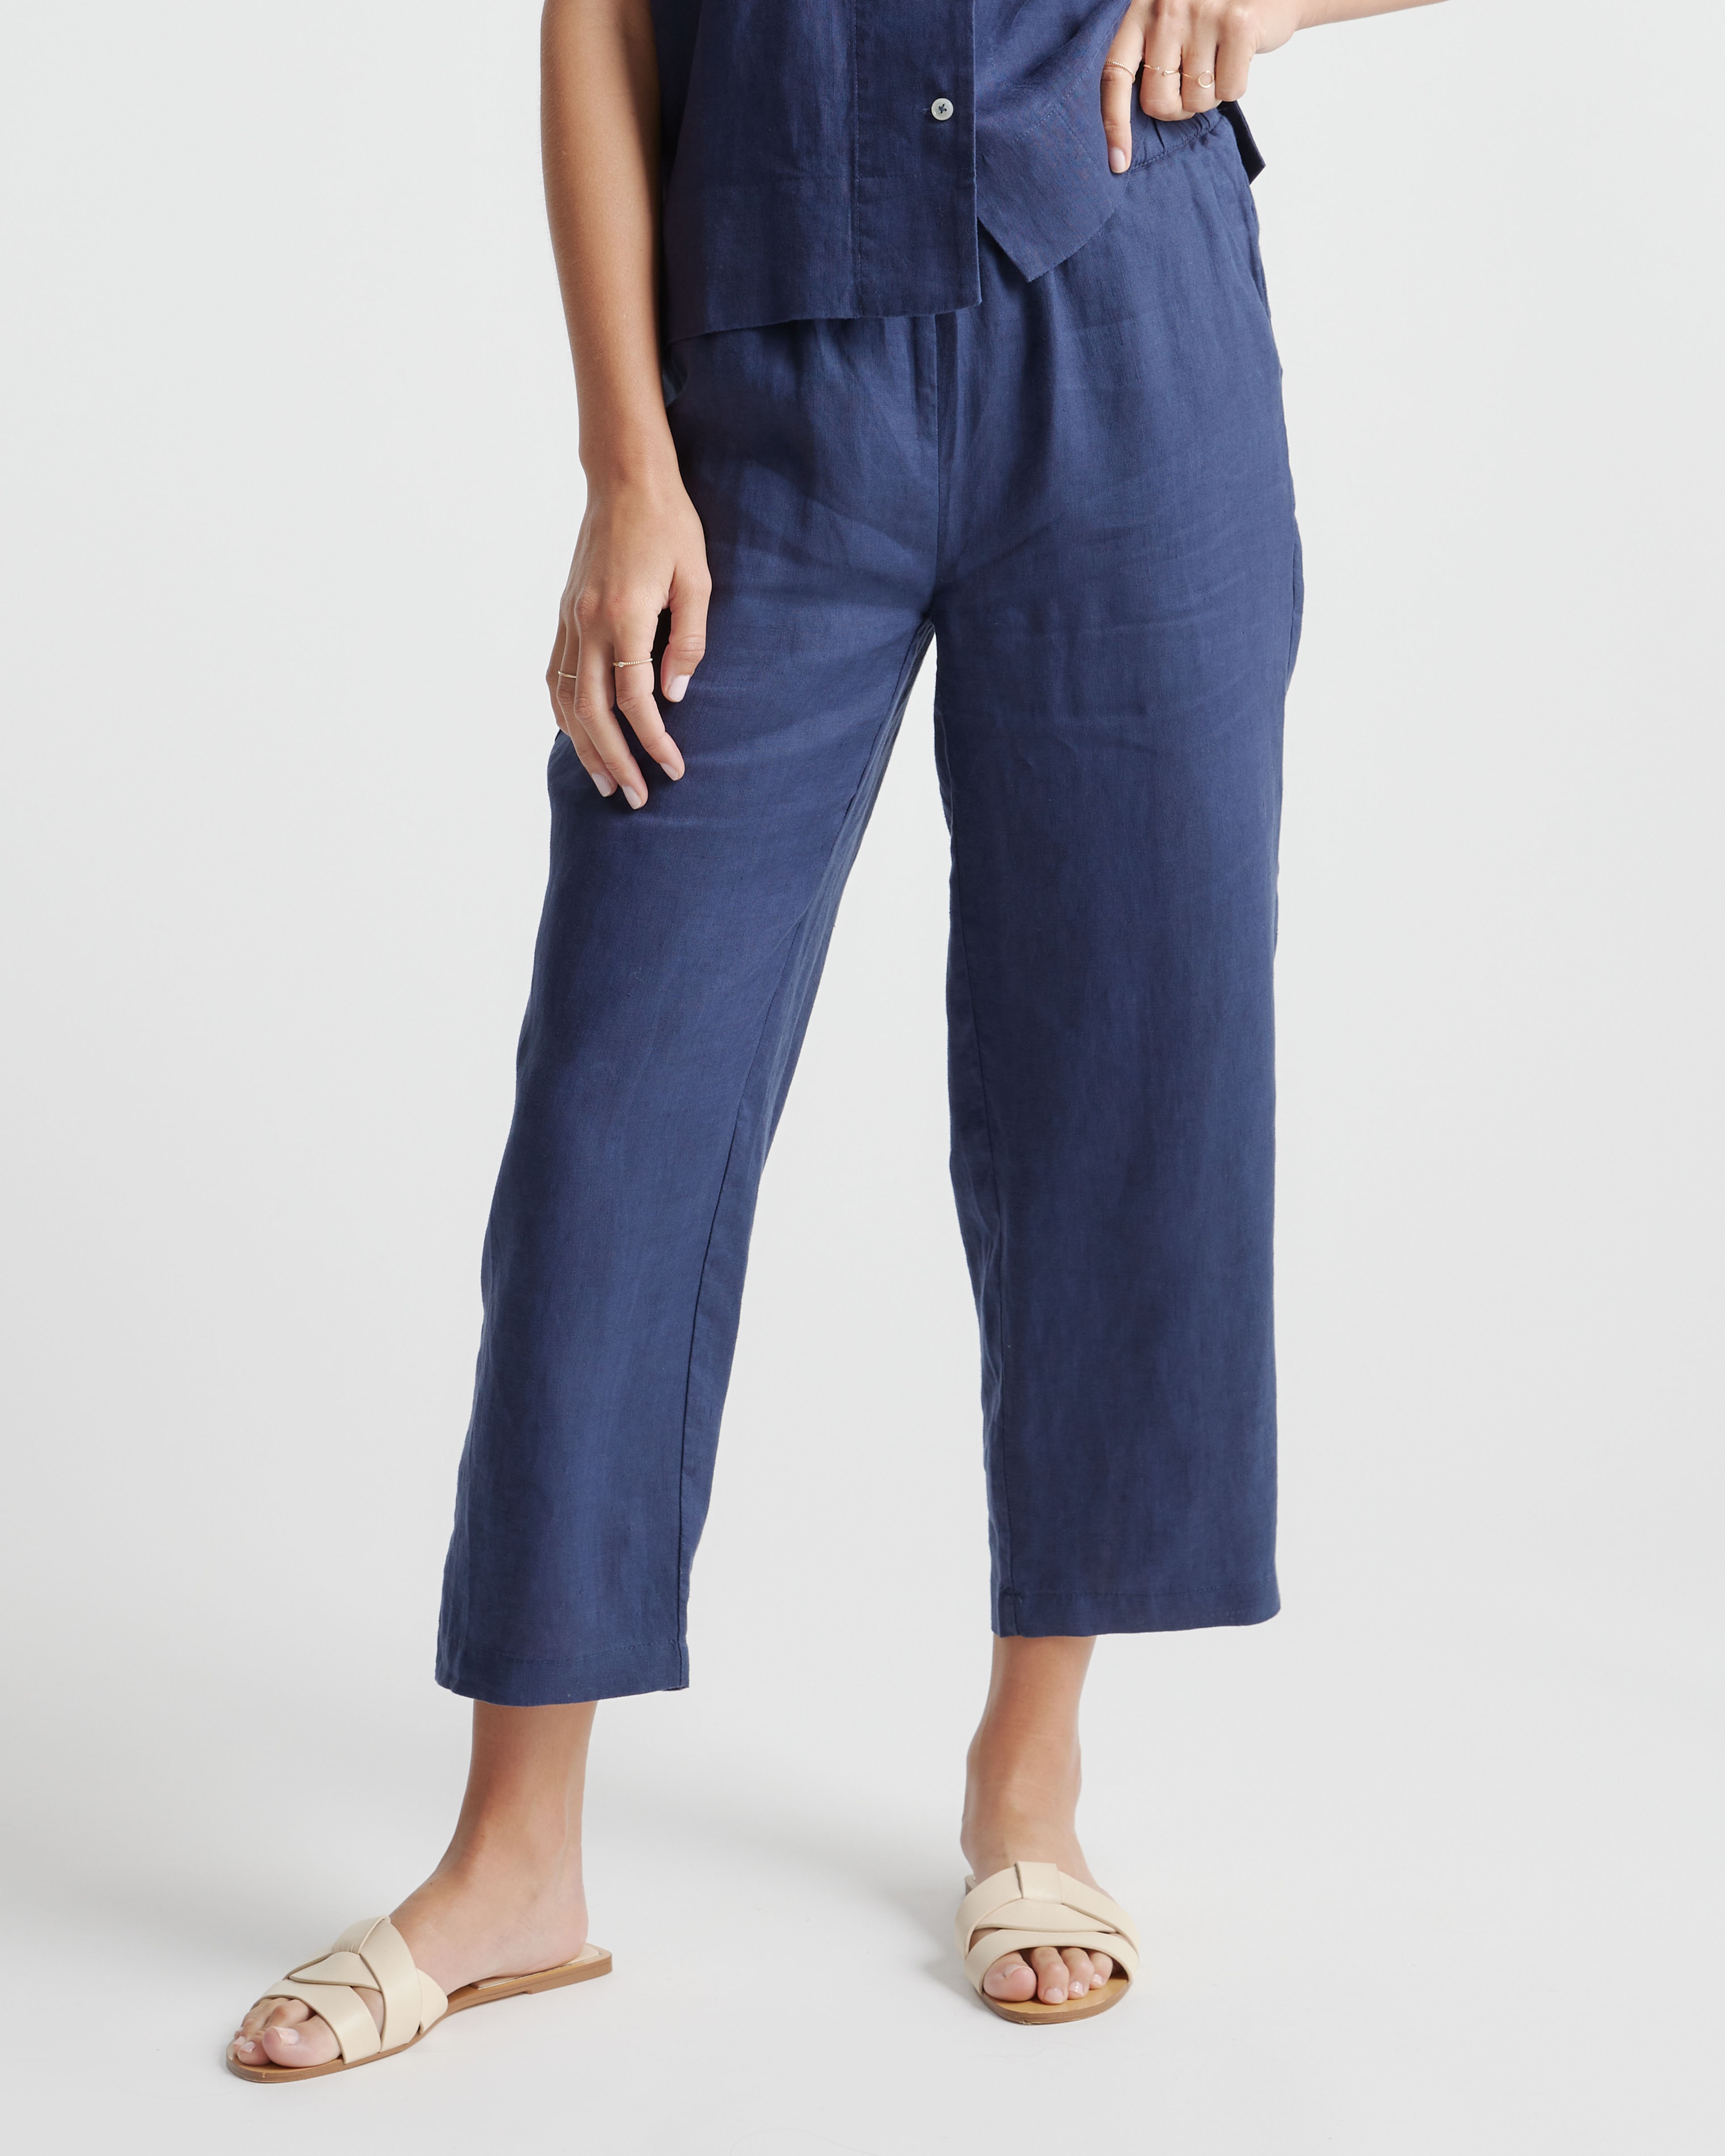 Women's Quince Straight-leg pants from $40